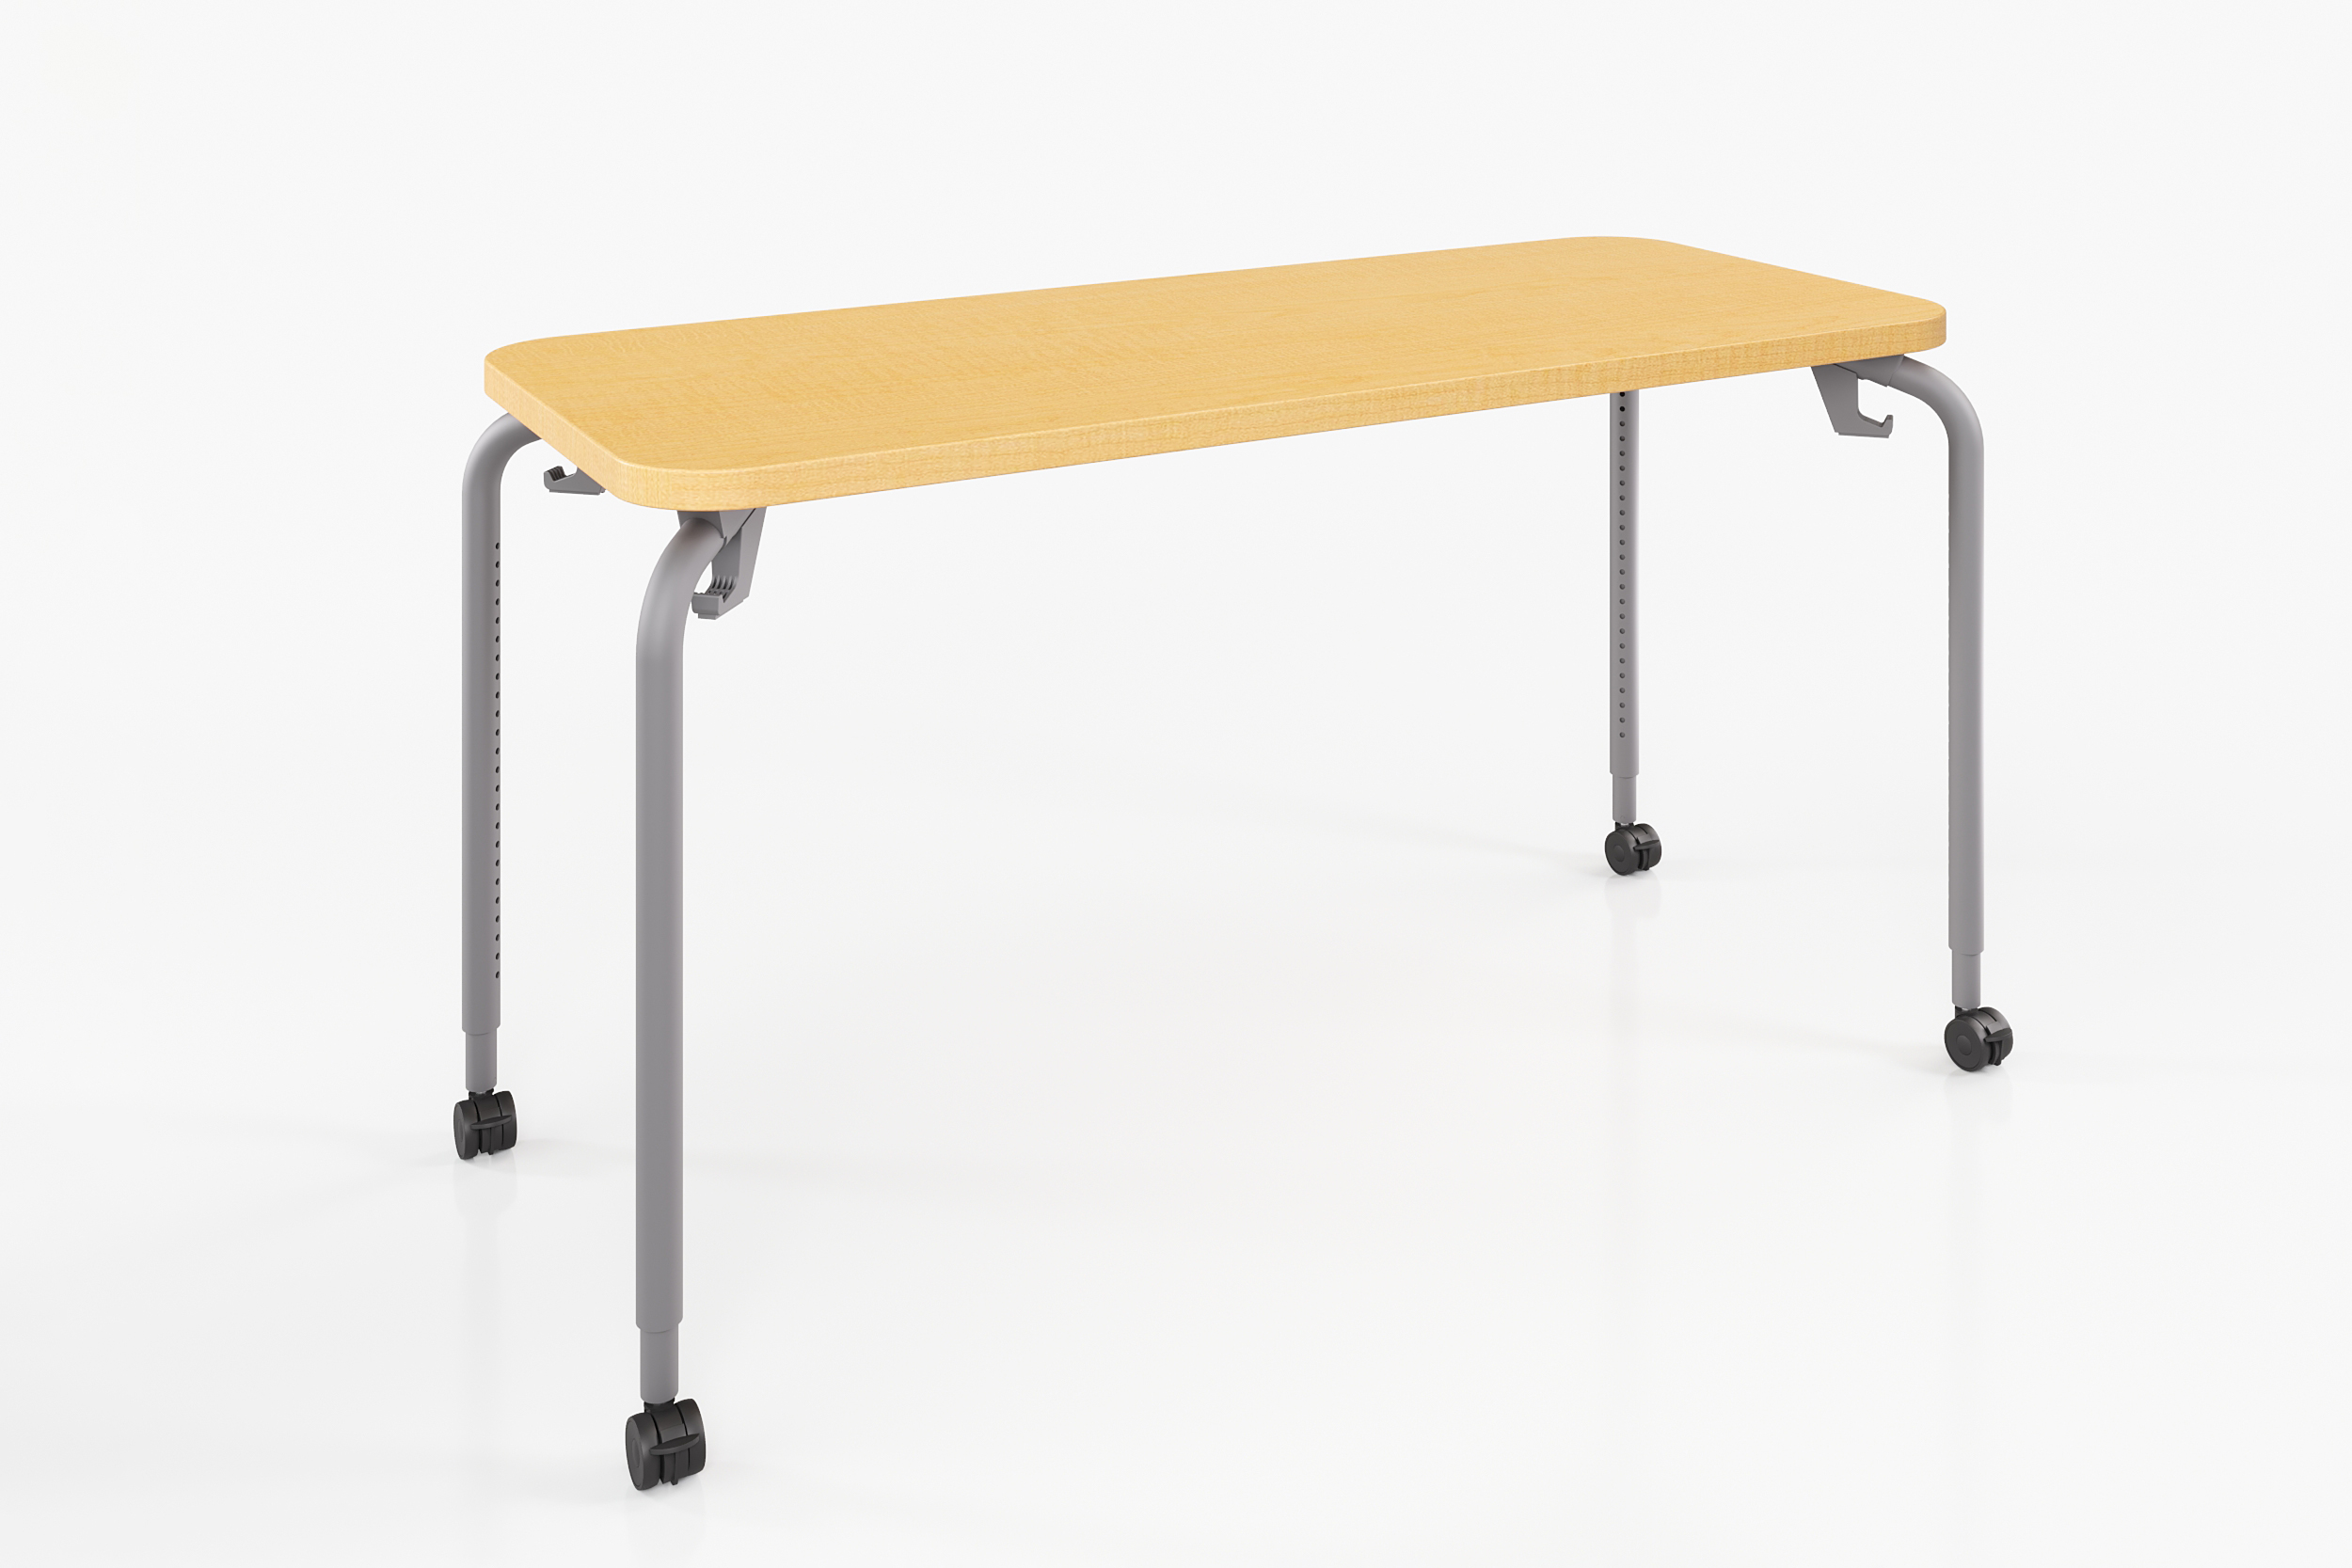 02241_60181_Numbers_High_Range_Desk_24x54_wCasters_FusionMaple